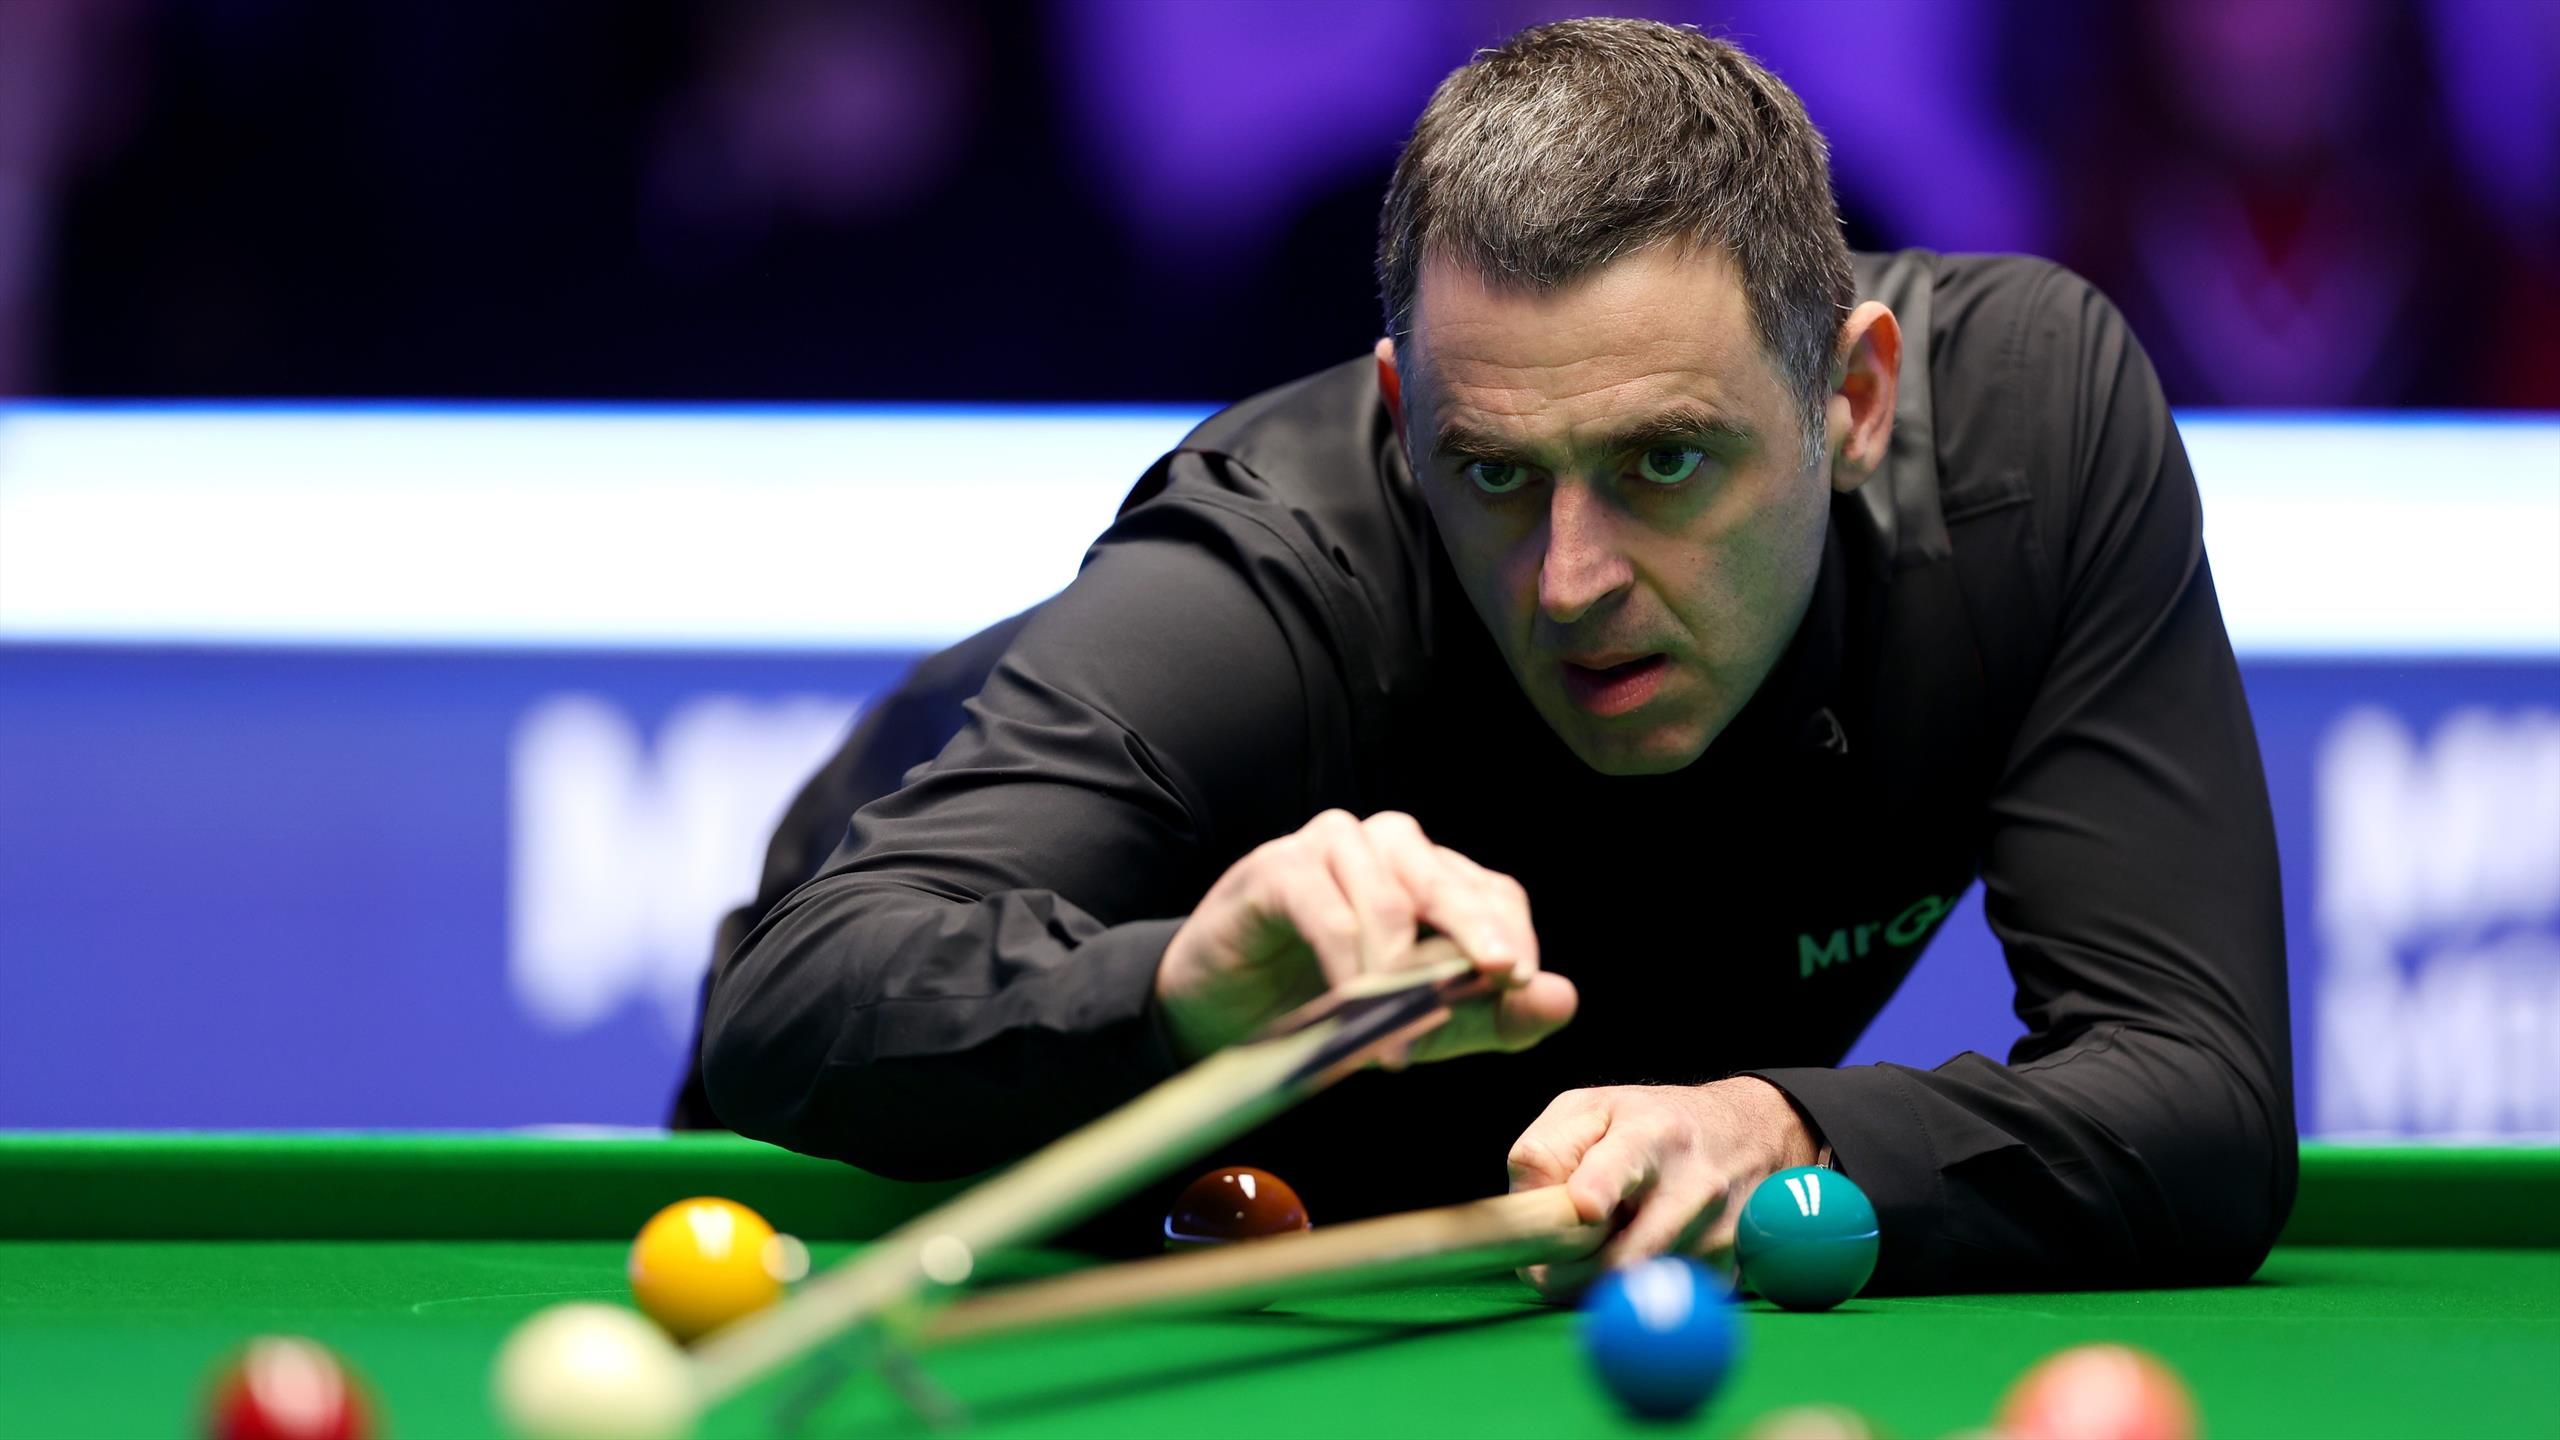 ‘Oh no’ Ronnie O’Sullivan escapes from snooker and flukes pot against